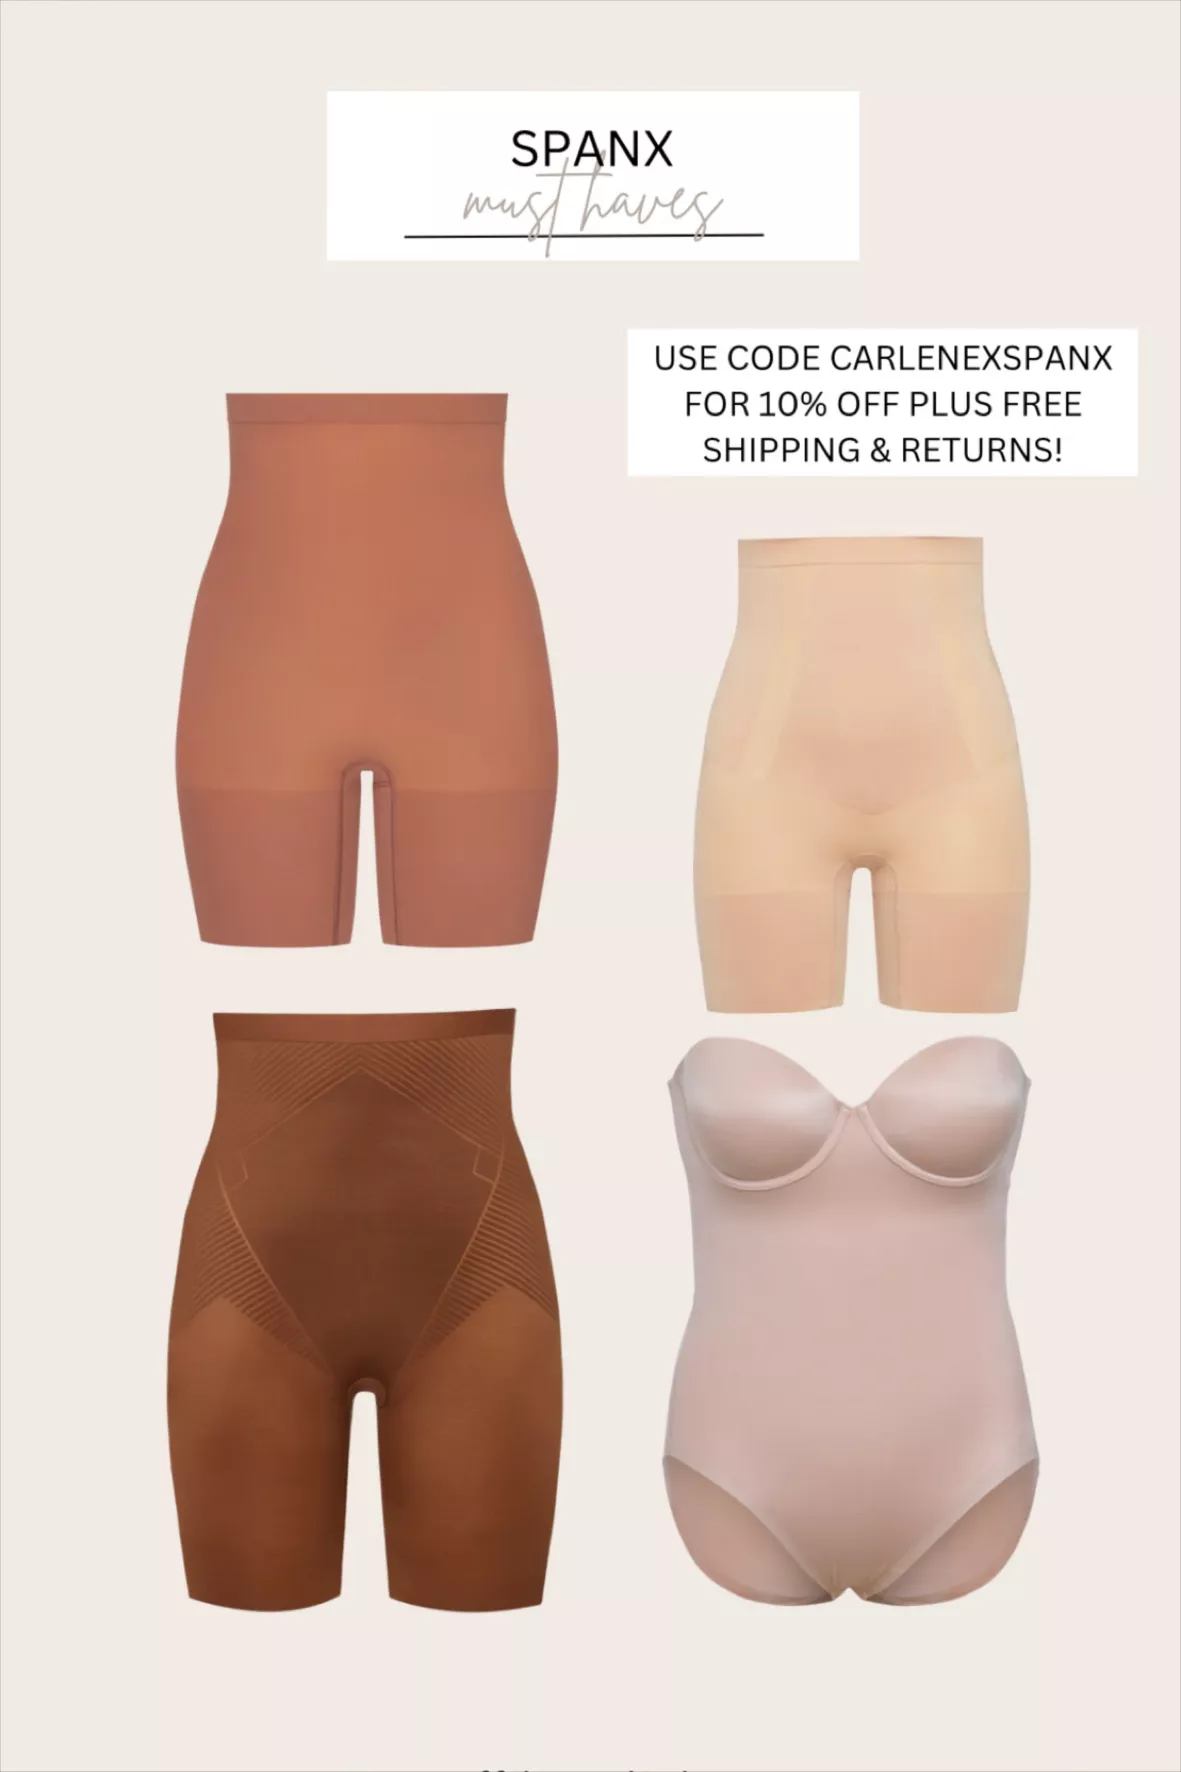 OnCore Mid-Thigh Bodysuit curated on LTK